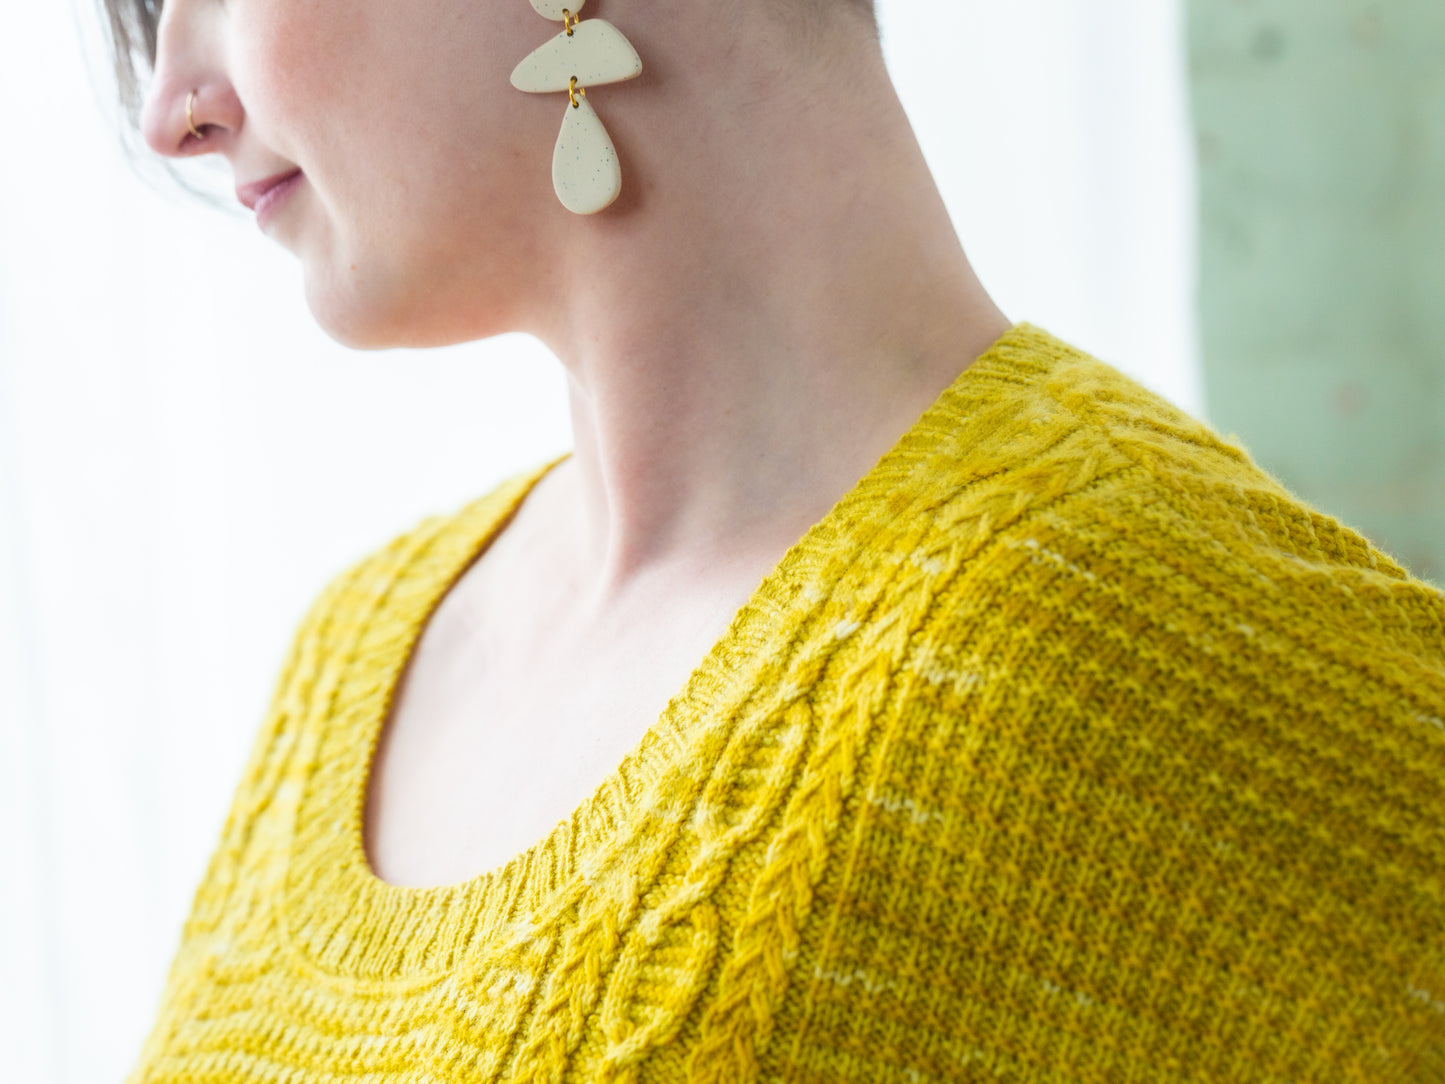 Seen close up, Jen wears a pullover, knit from bright yellow yarn, that has a cable and seed stitch texture.